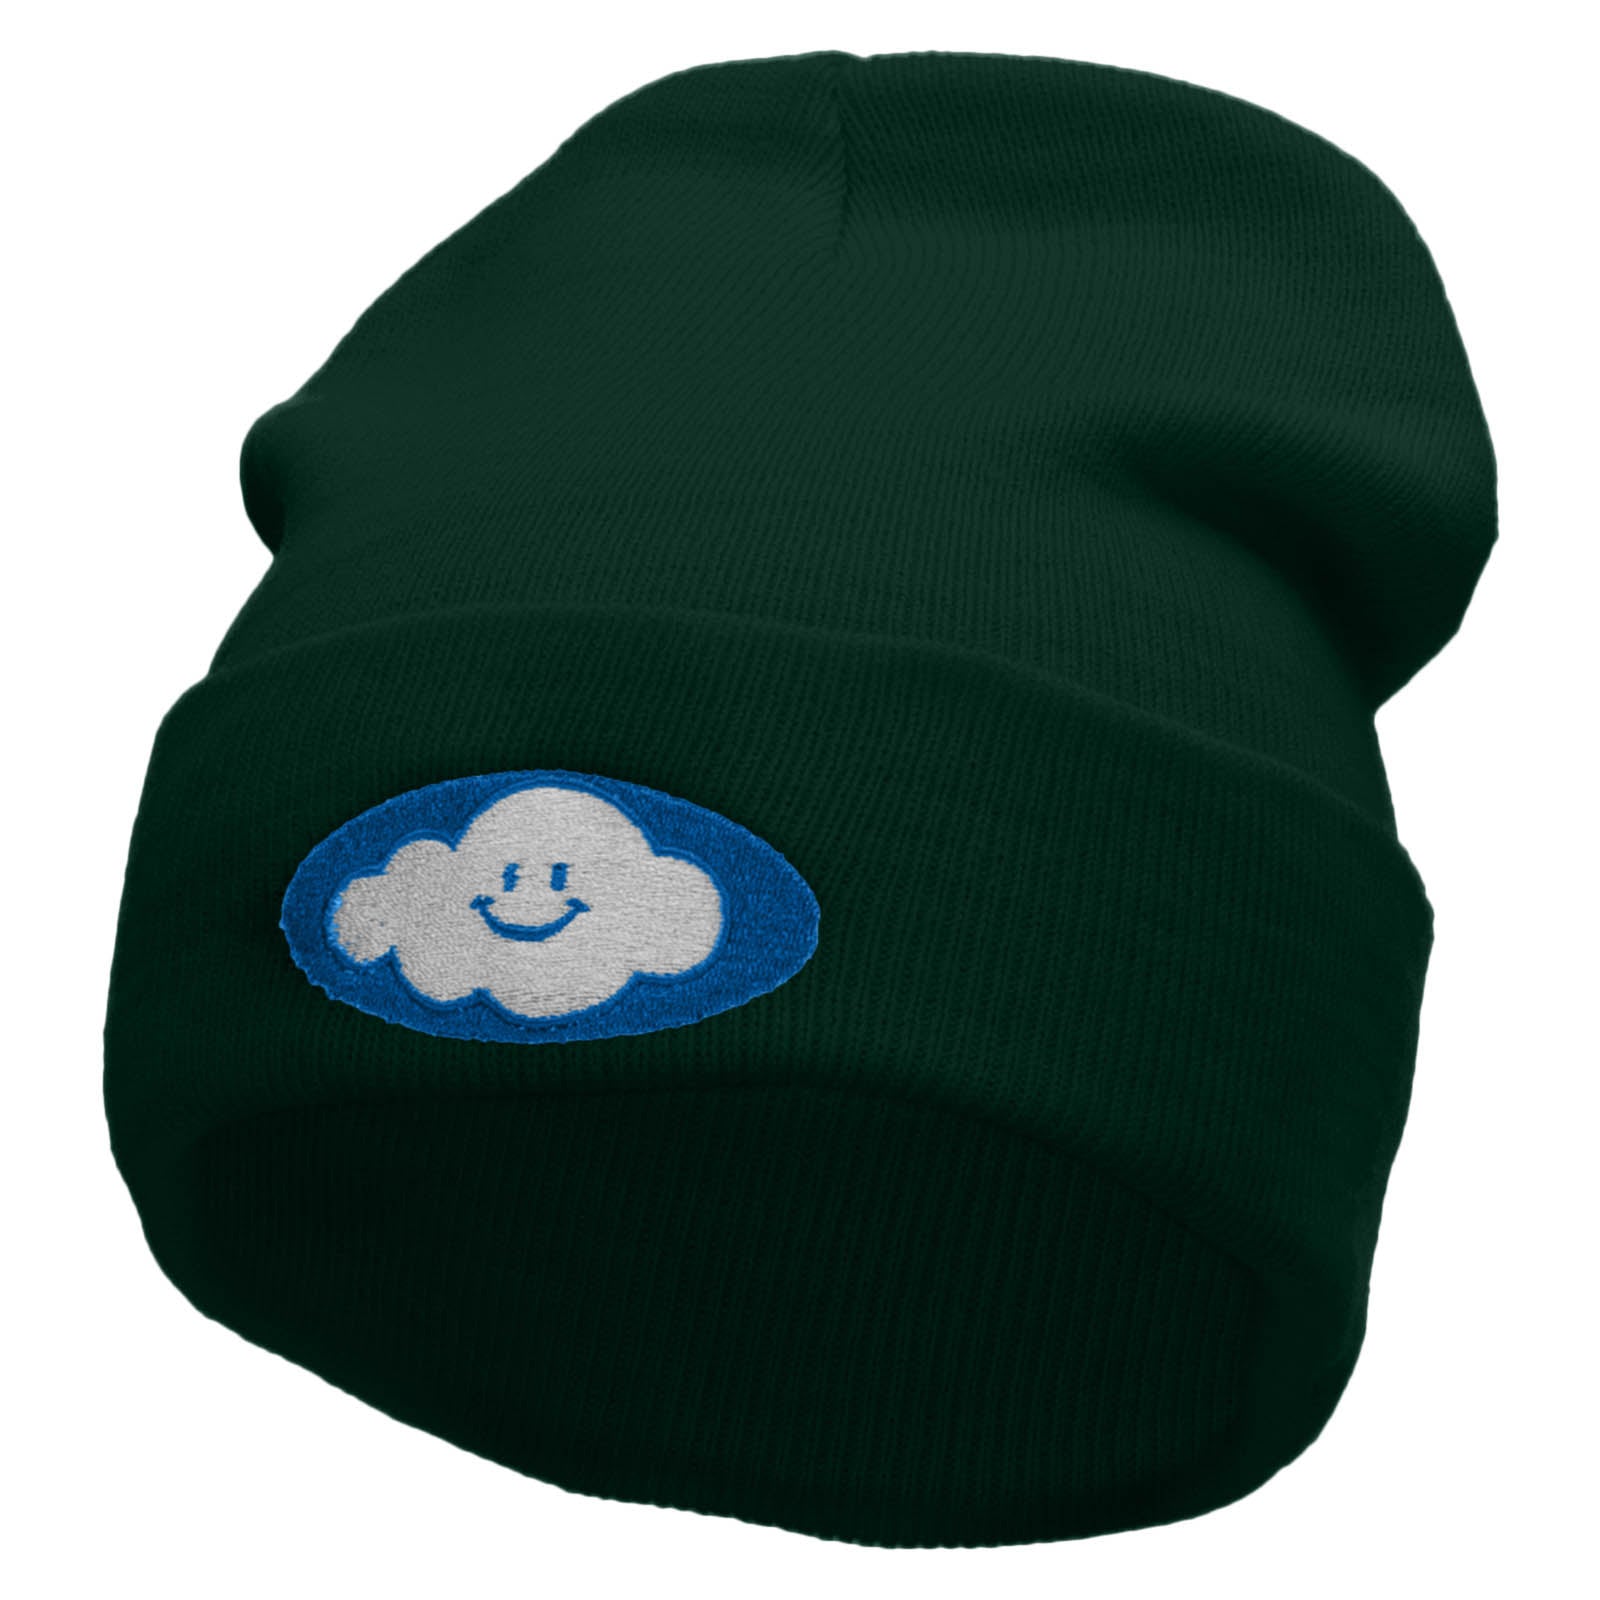 Smile Cloud Embroidered 12 Inch Long Knitted Beanie - Dk Green OSFM